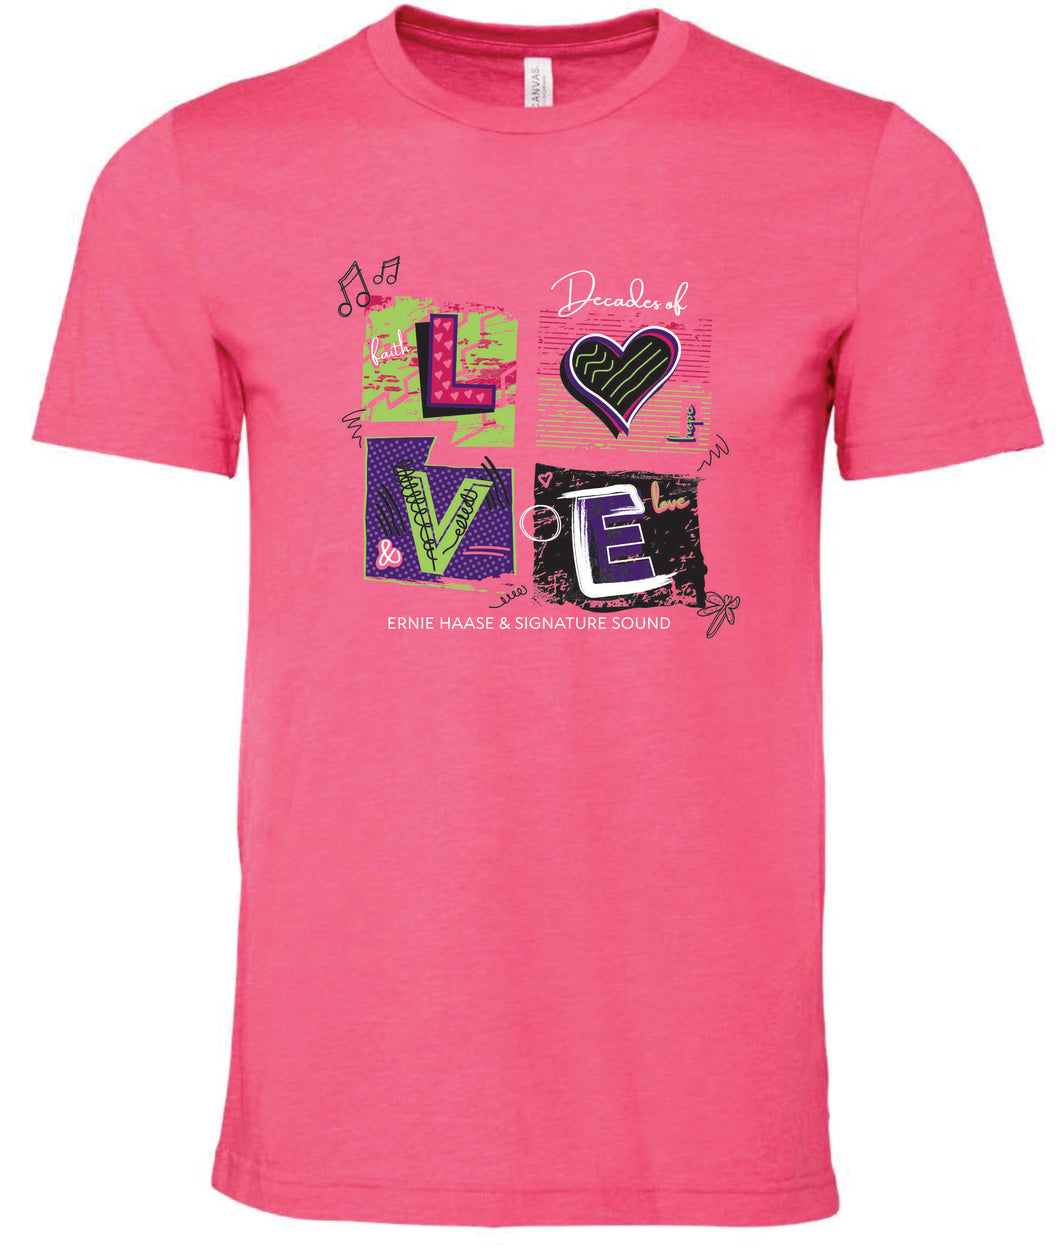 Decades Of Love Pink Tee